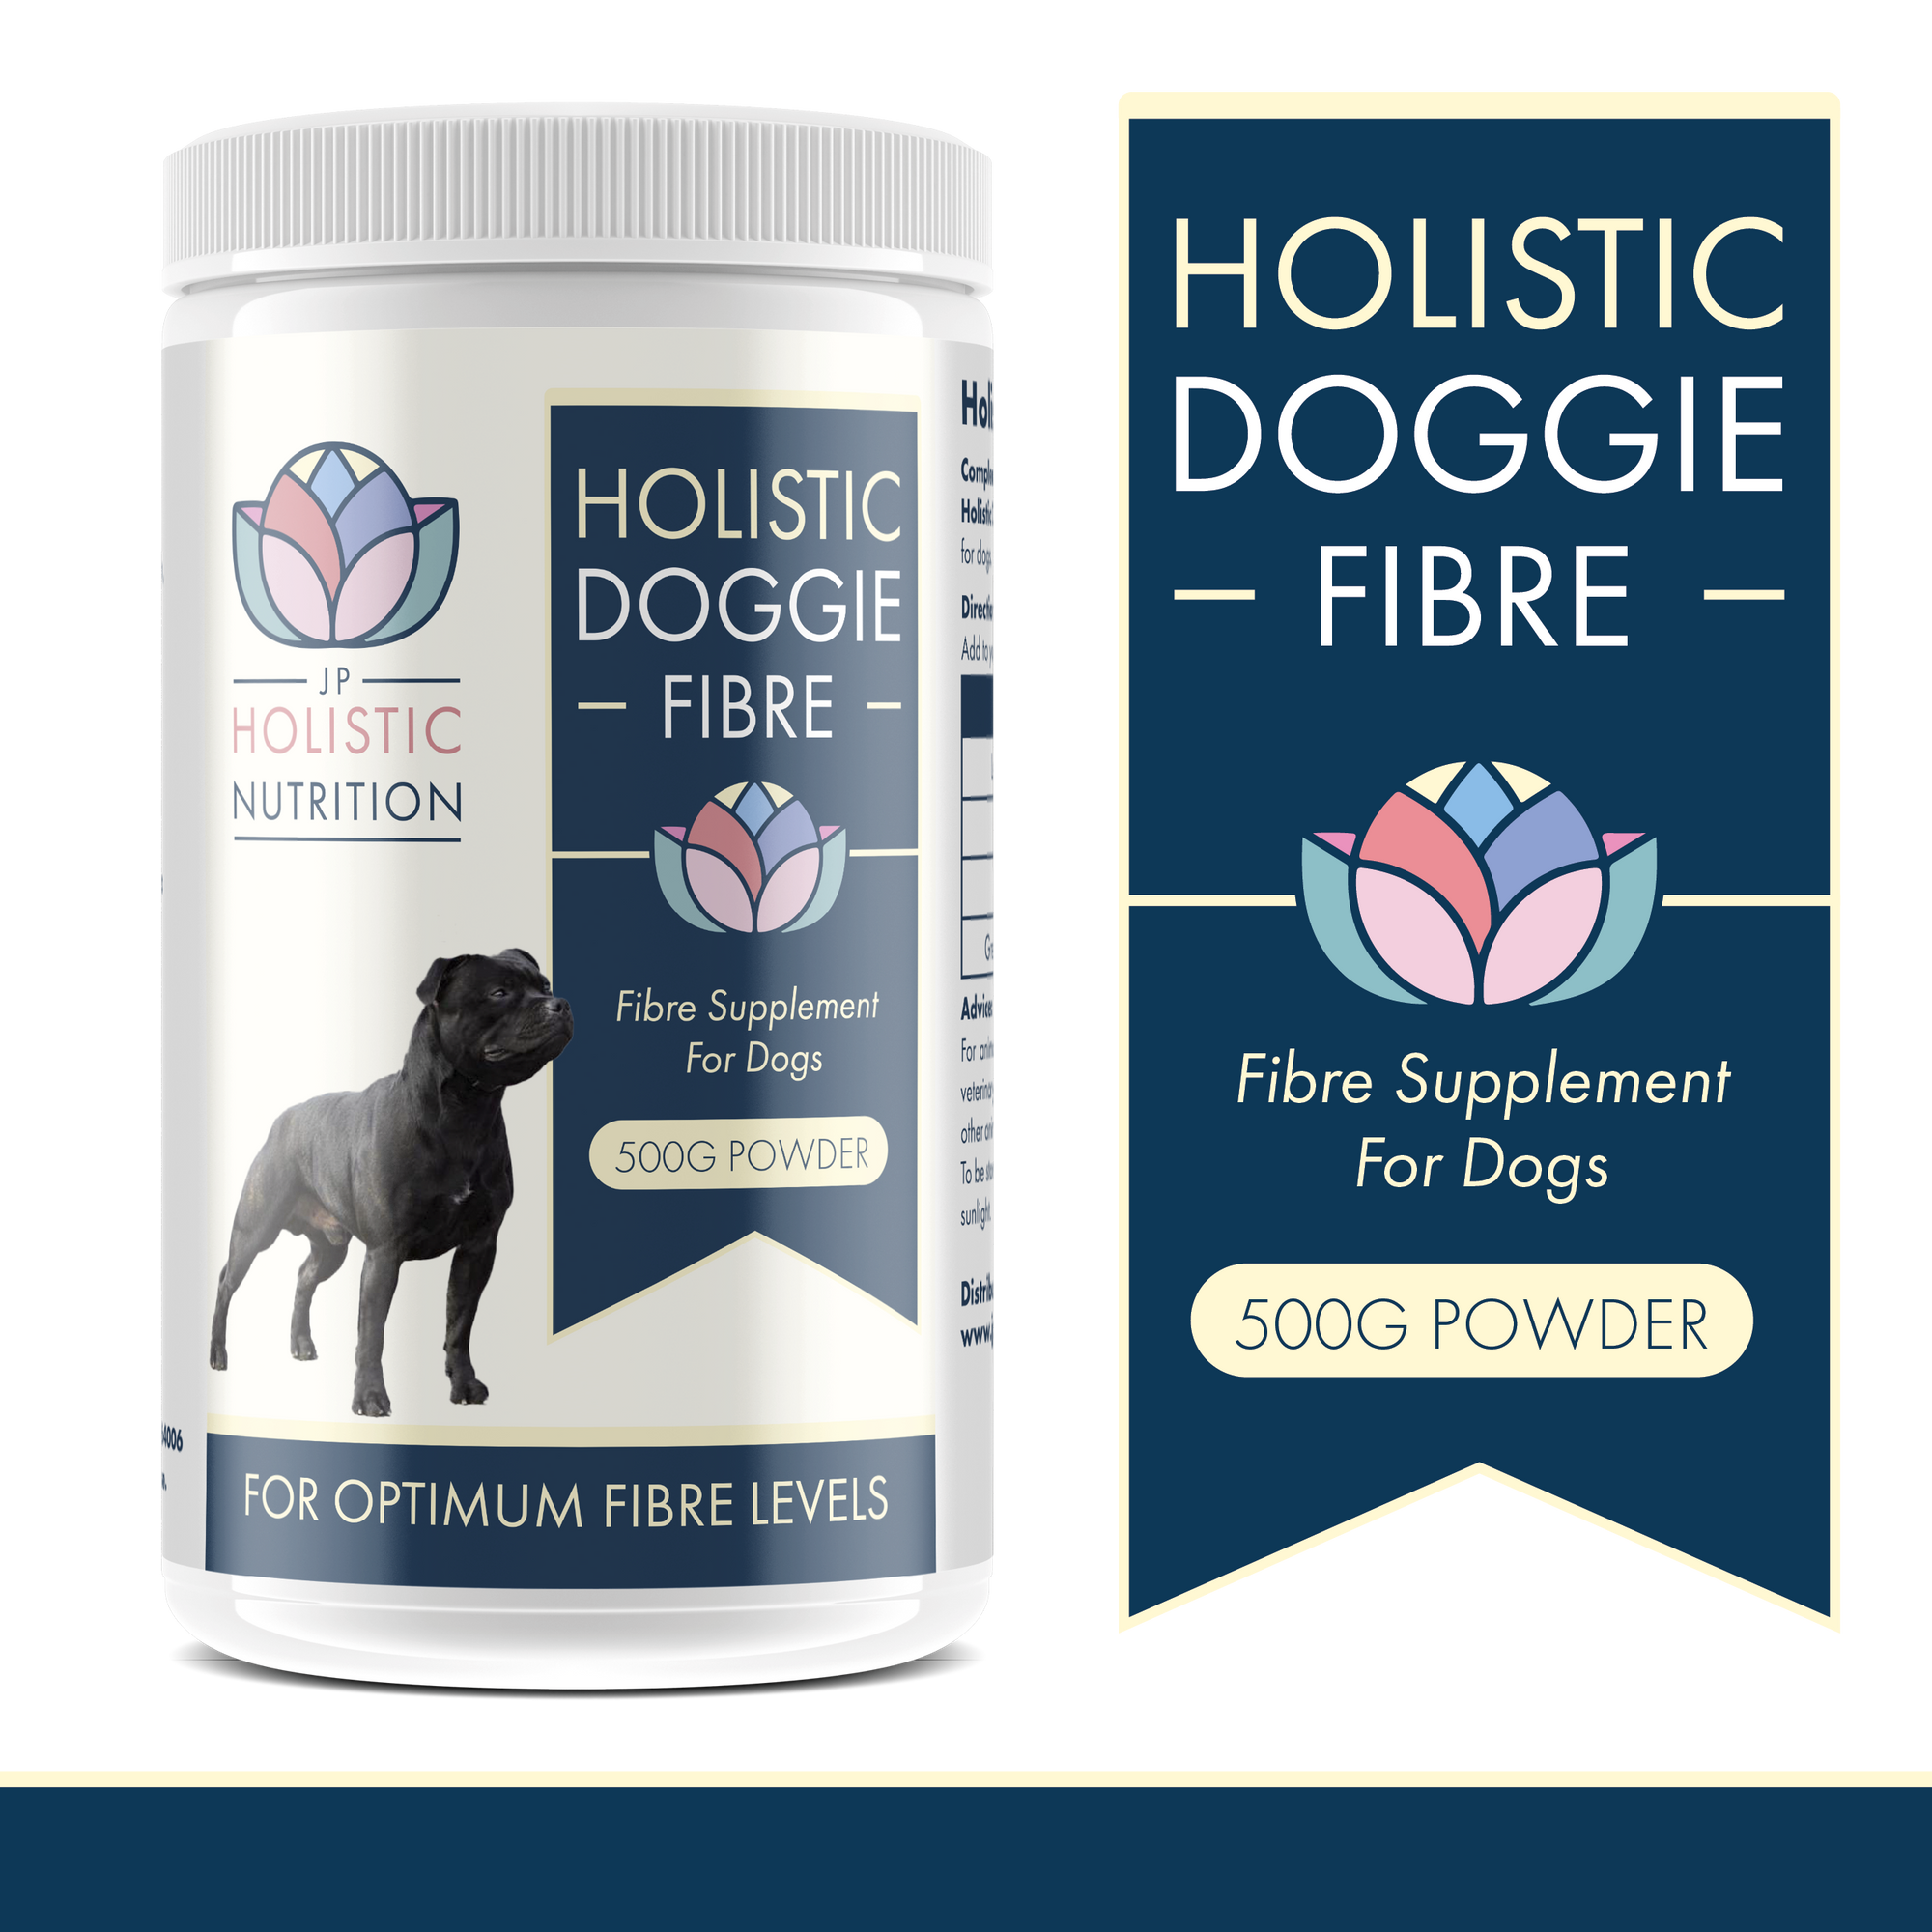 Fibre supplement for dogs